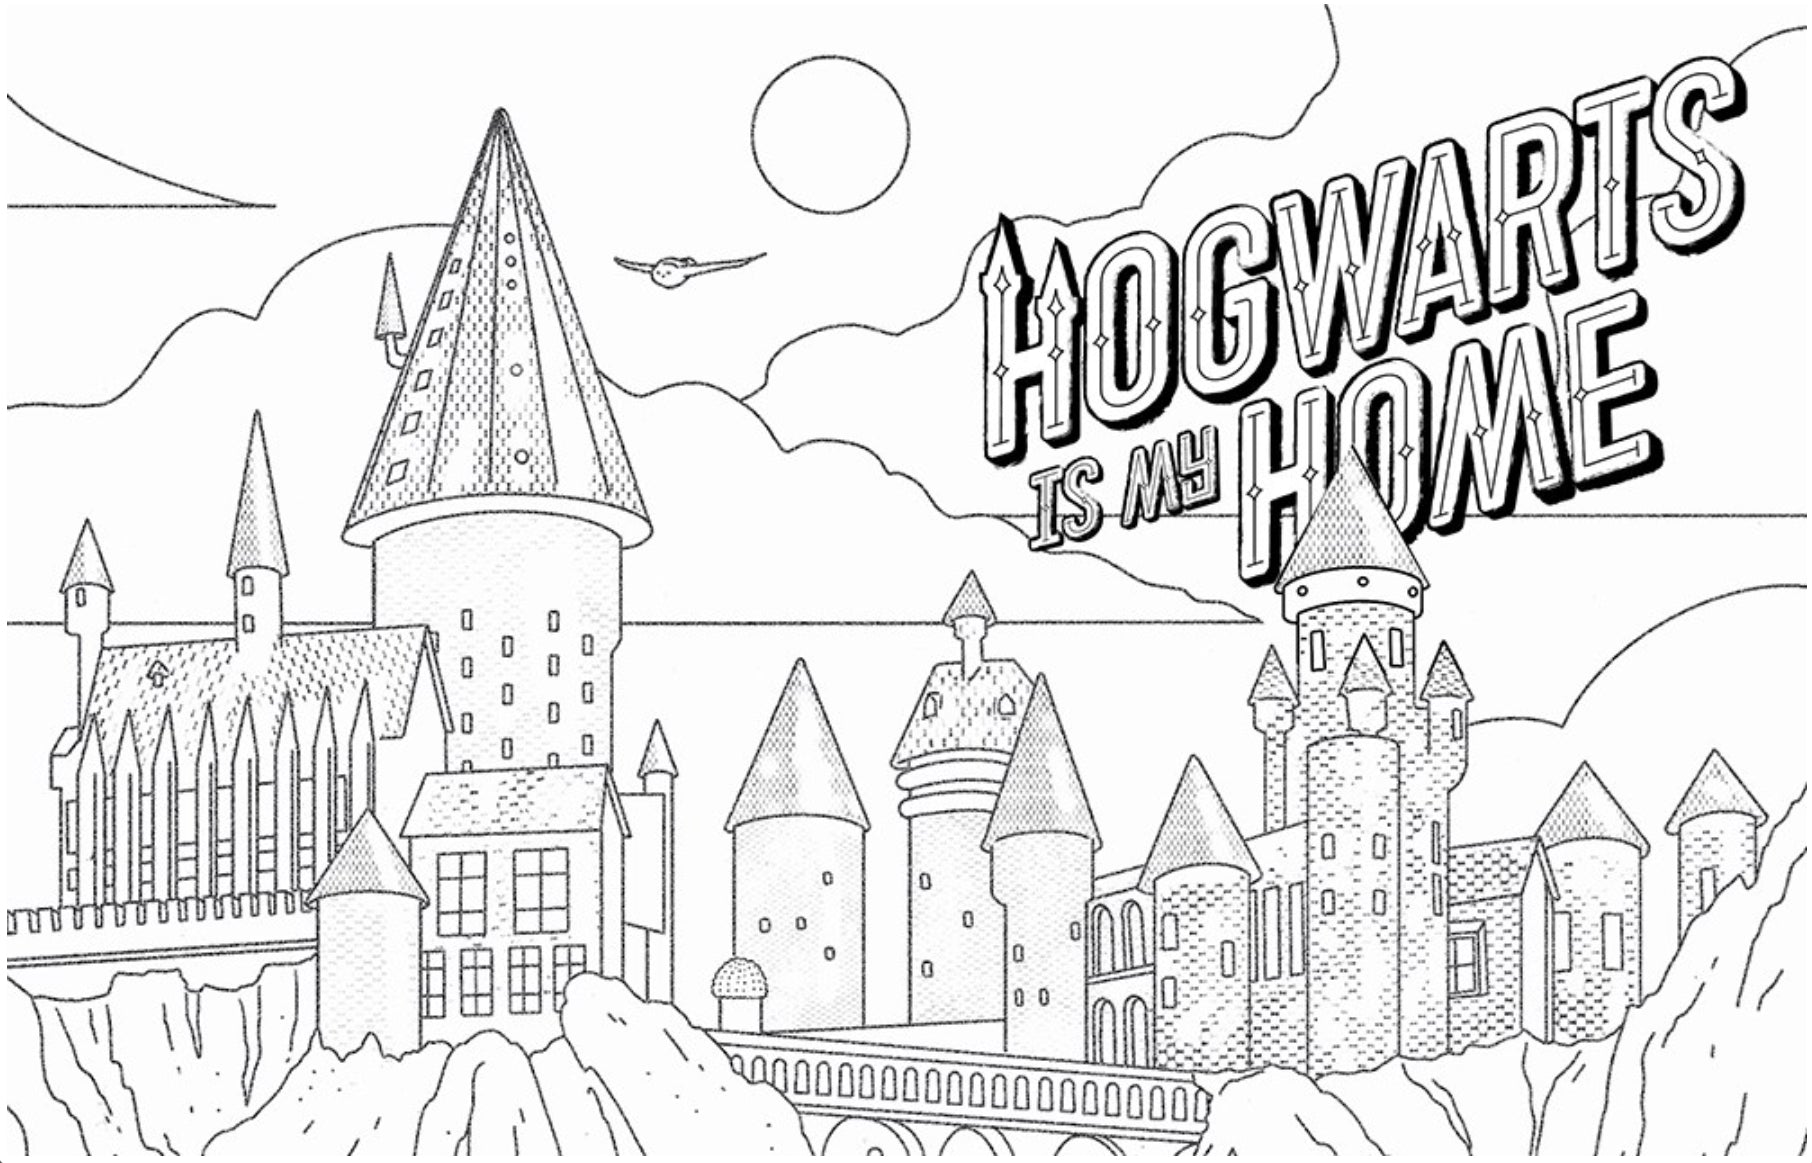 Harry Potter: An Official Hogwarts Coloring Book [Book]